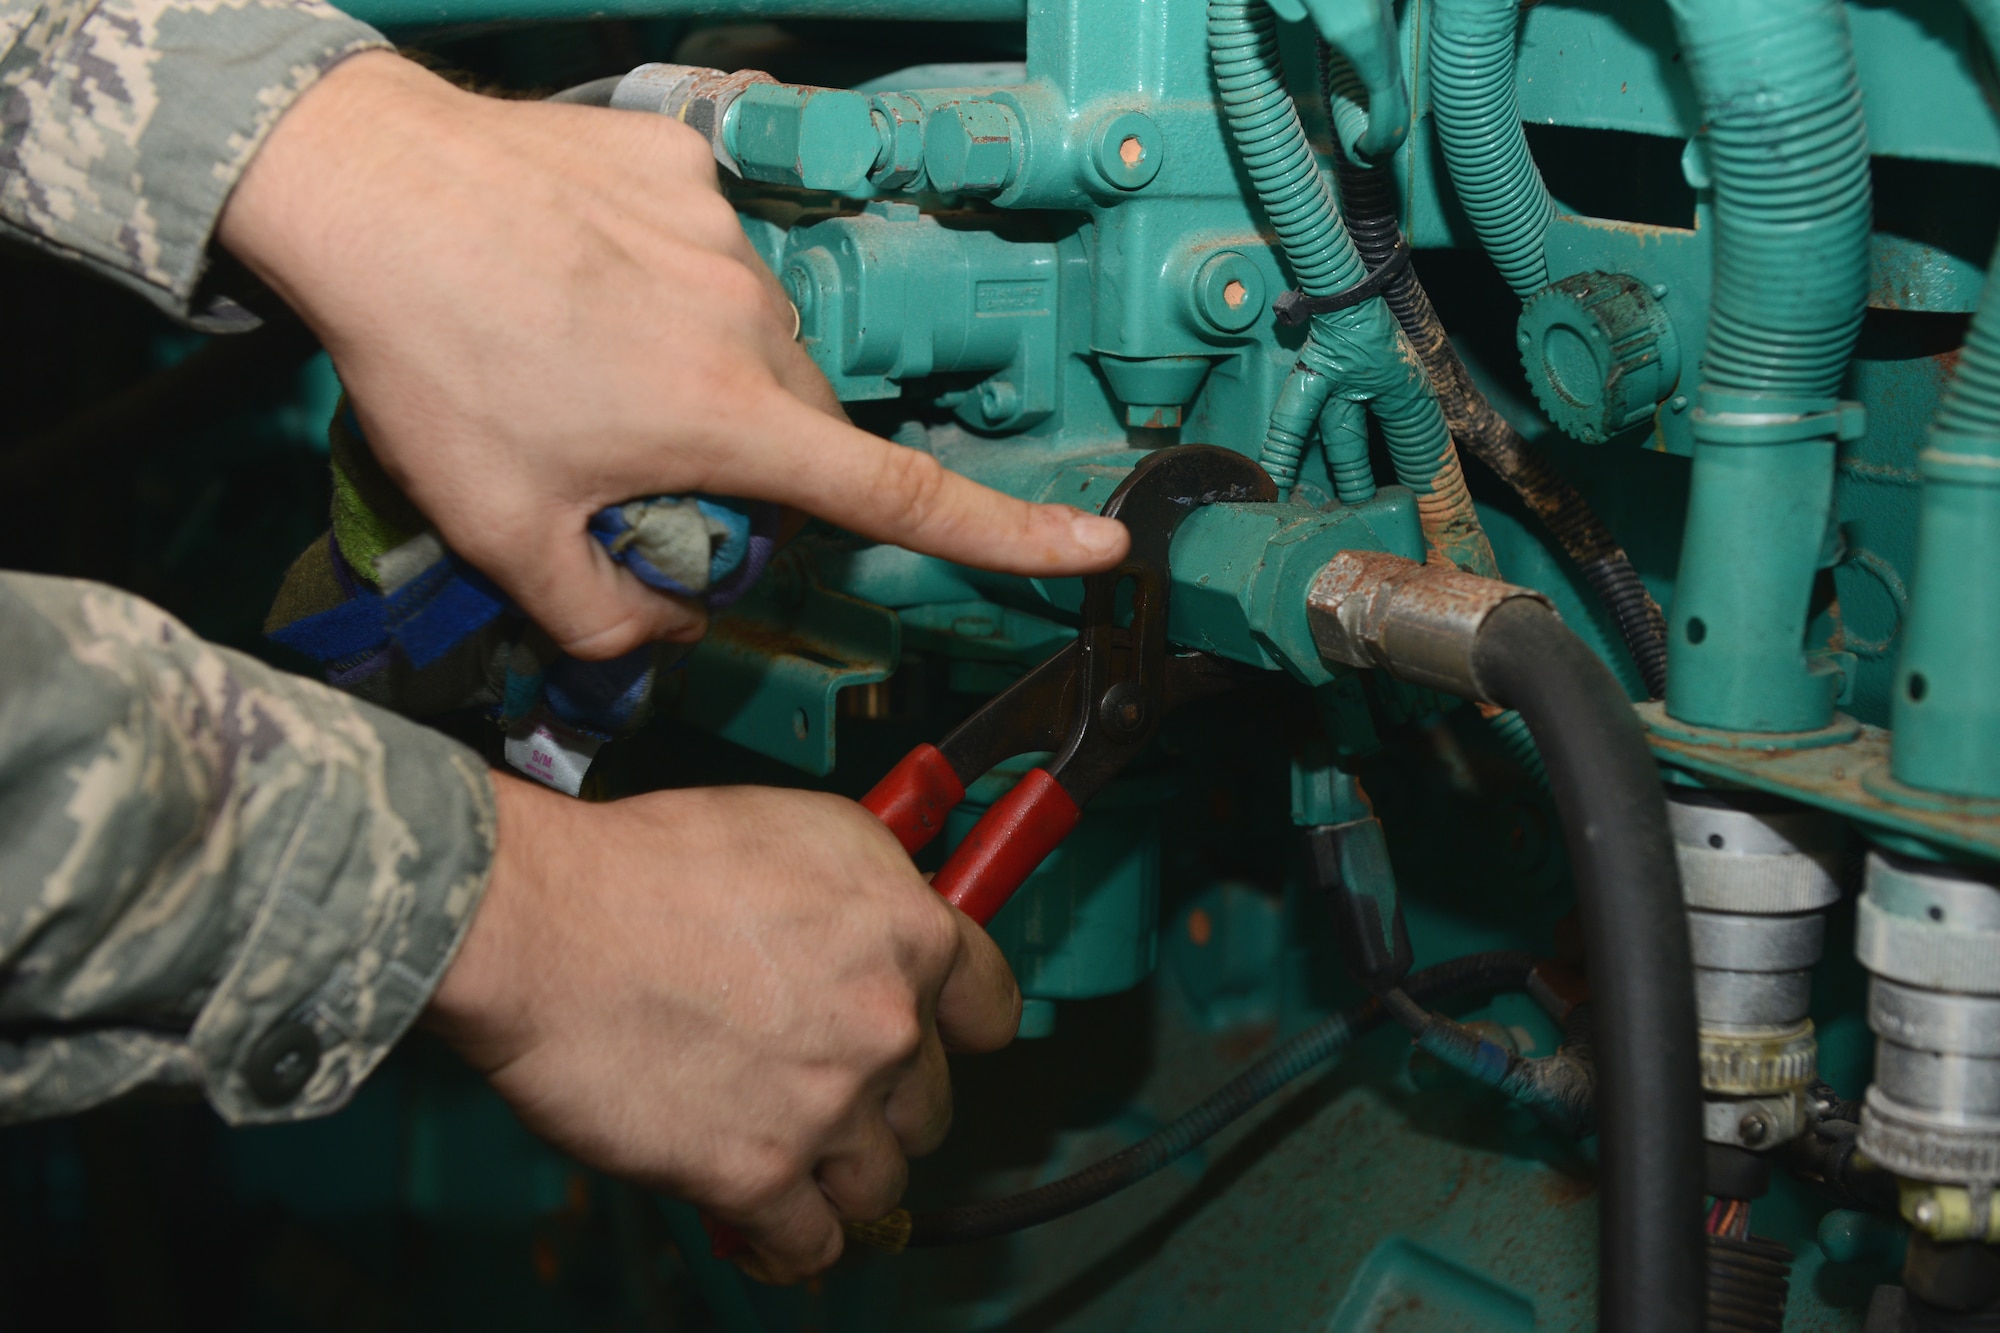 Staff Sgt. Christopher R. Bratton, 36th Civil Engineer Squadron power production craftsman, tightens a fuel strainer on a 350 kilowatt diesel generator Sept. 29, 2015, at Andersen Air Force Base, Guam. Engineers constantly battle corrosive rust that plagues the base infrastructure. (U.S. Air Force photo by Airman 1st Class Arielle Vasquez/Released)